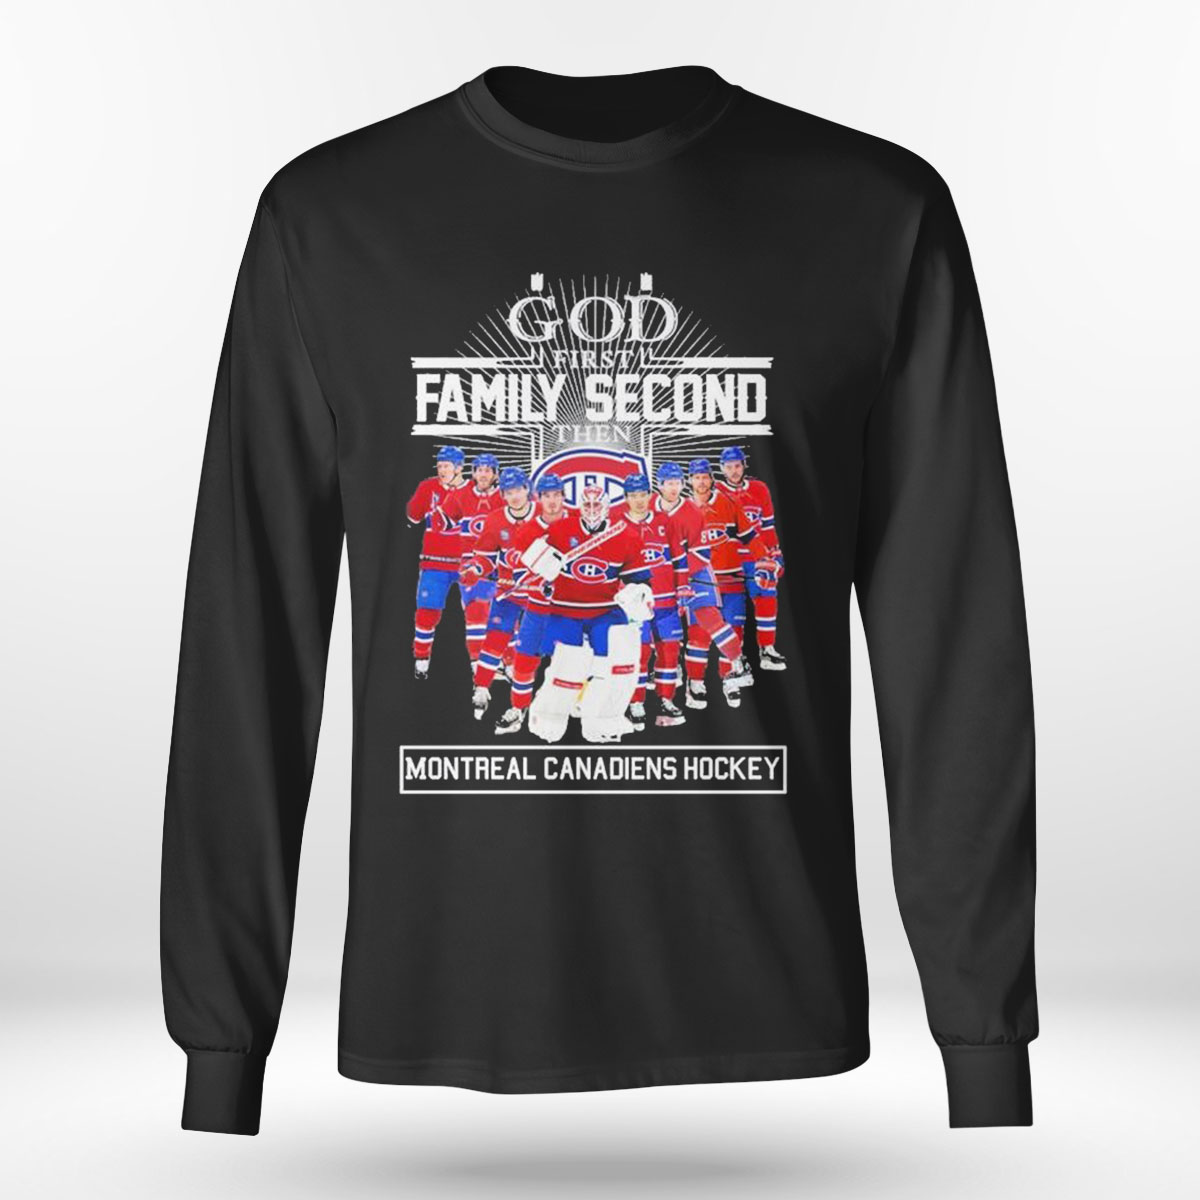 God First Family Second Then Montreal Canadiens Hockey Team T-shirt